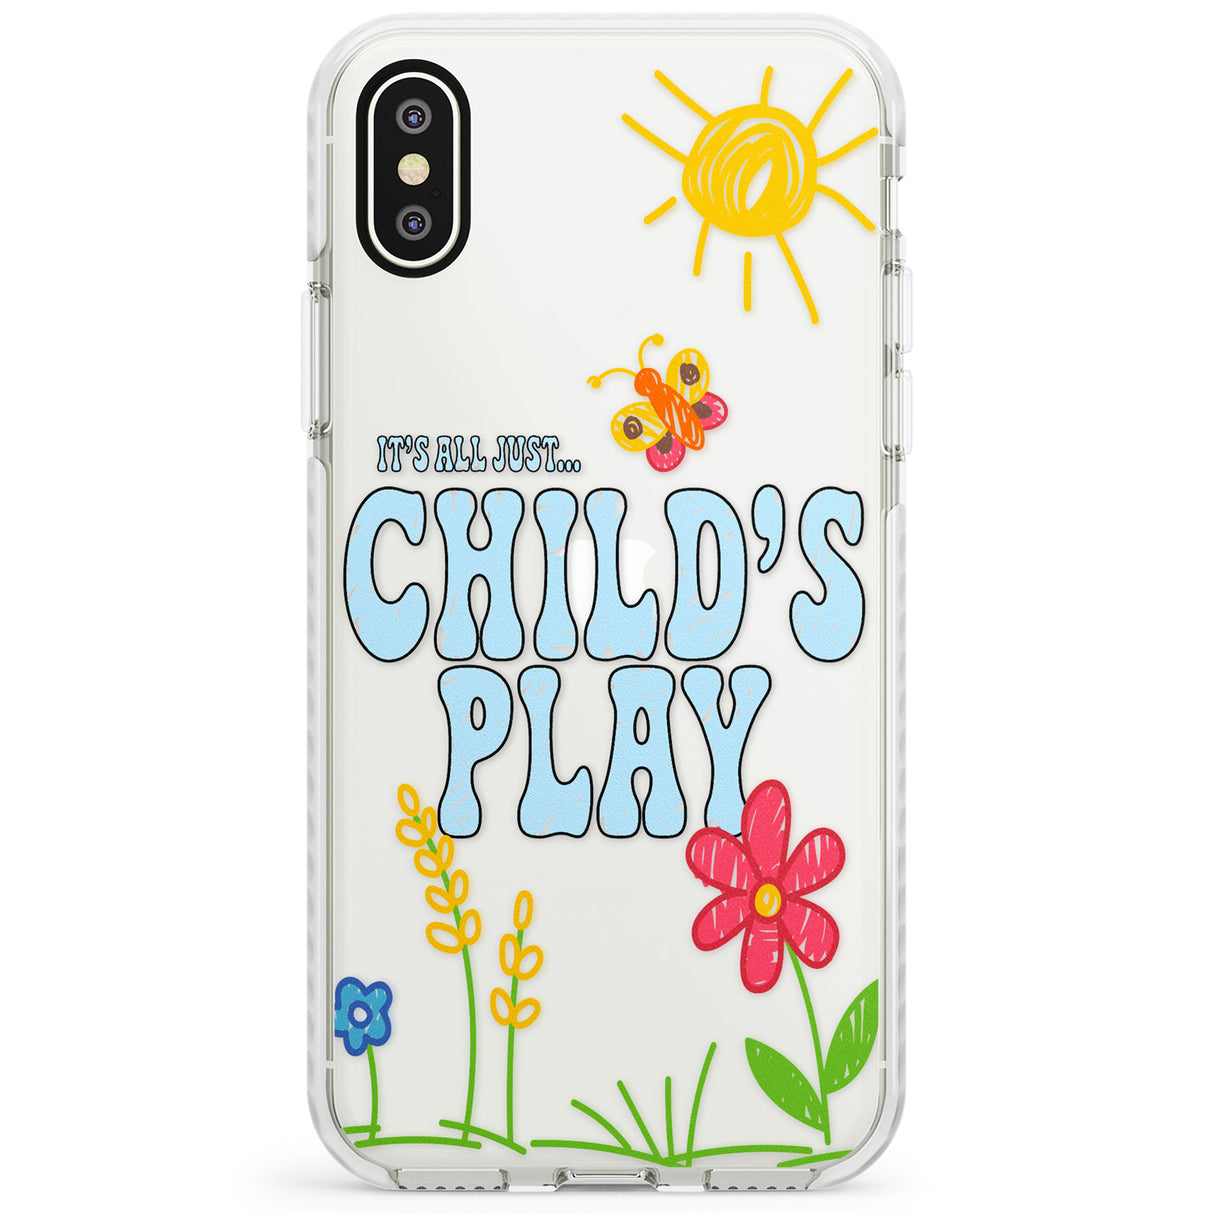 Child's Play Impact Phone Case for iPhone X XS Max XR